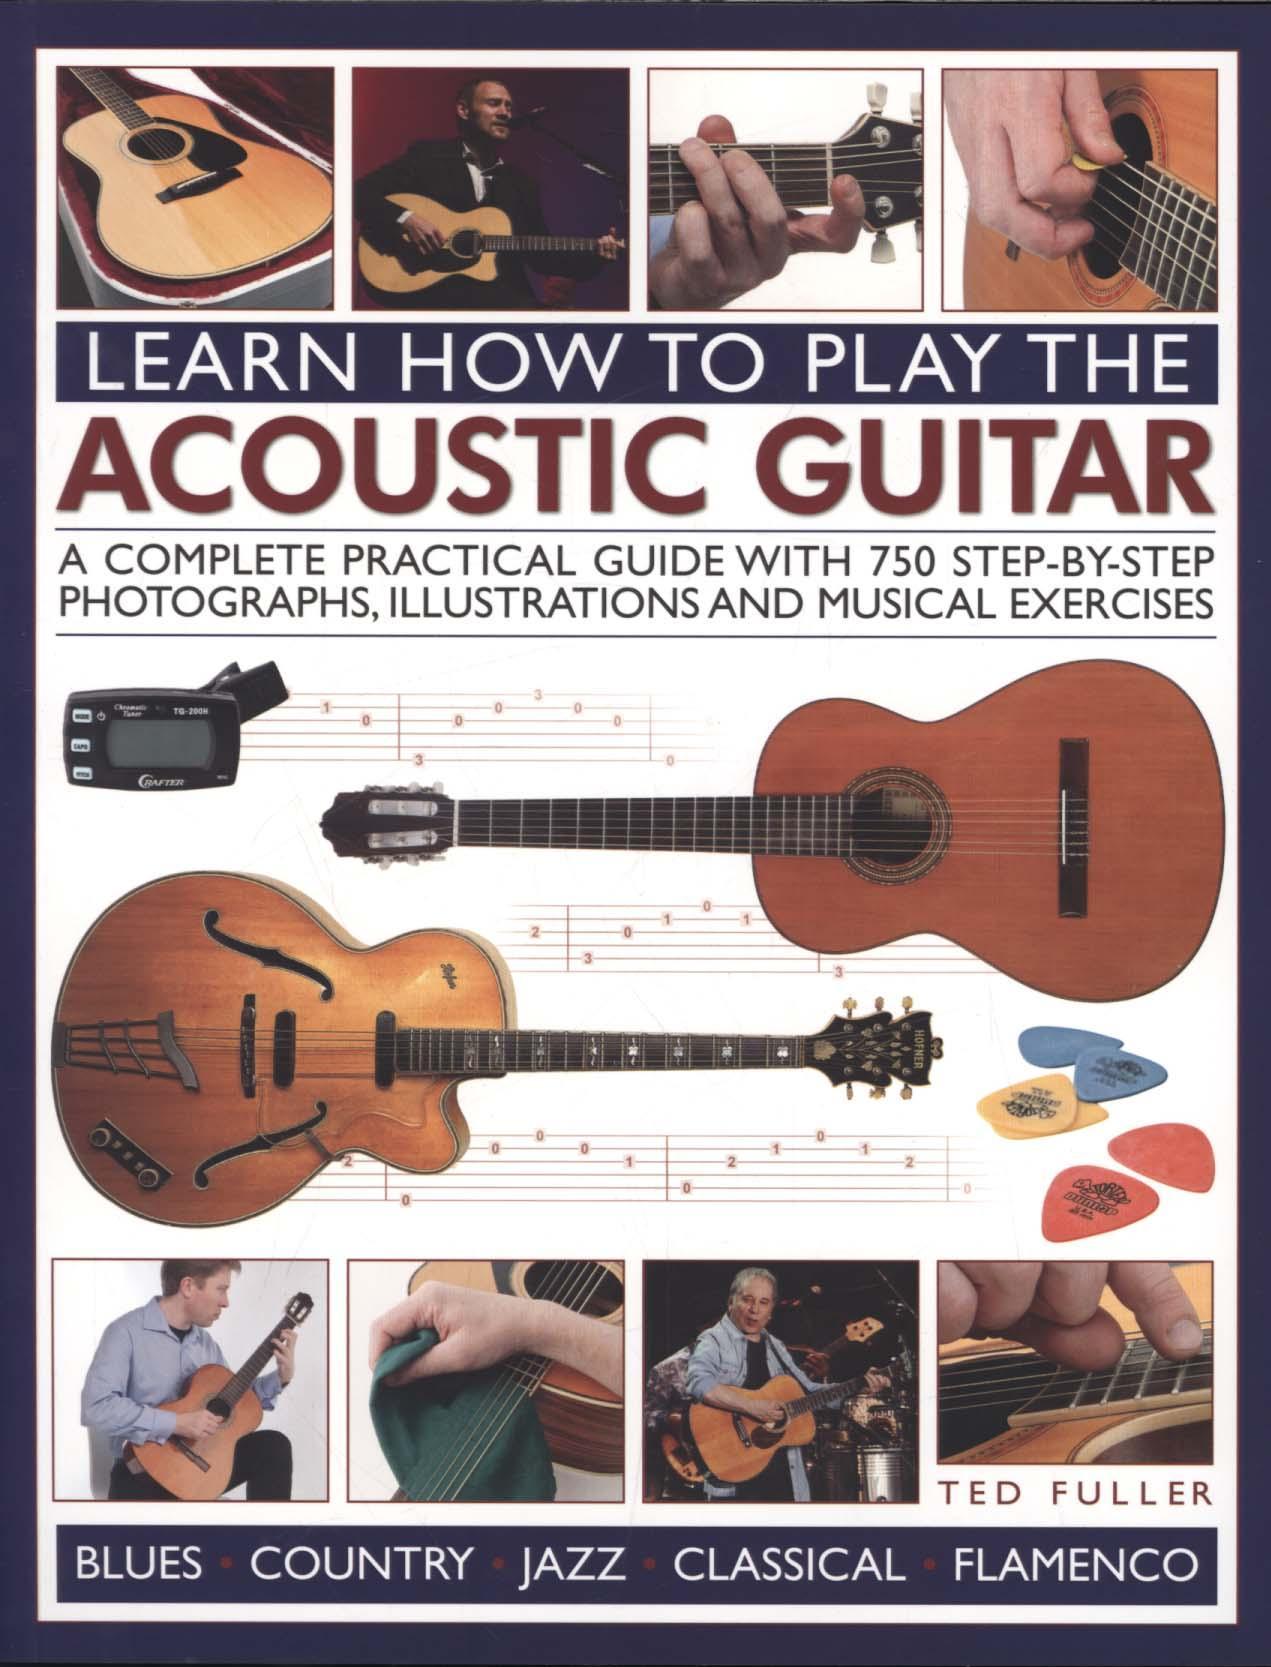 Learn How to Play the Acoustic Guitar - Ted Fuller